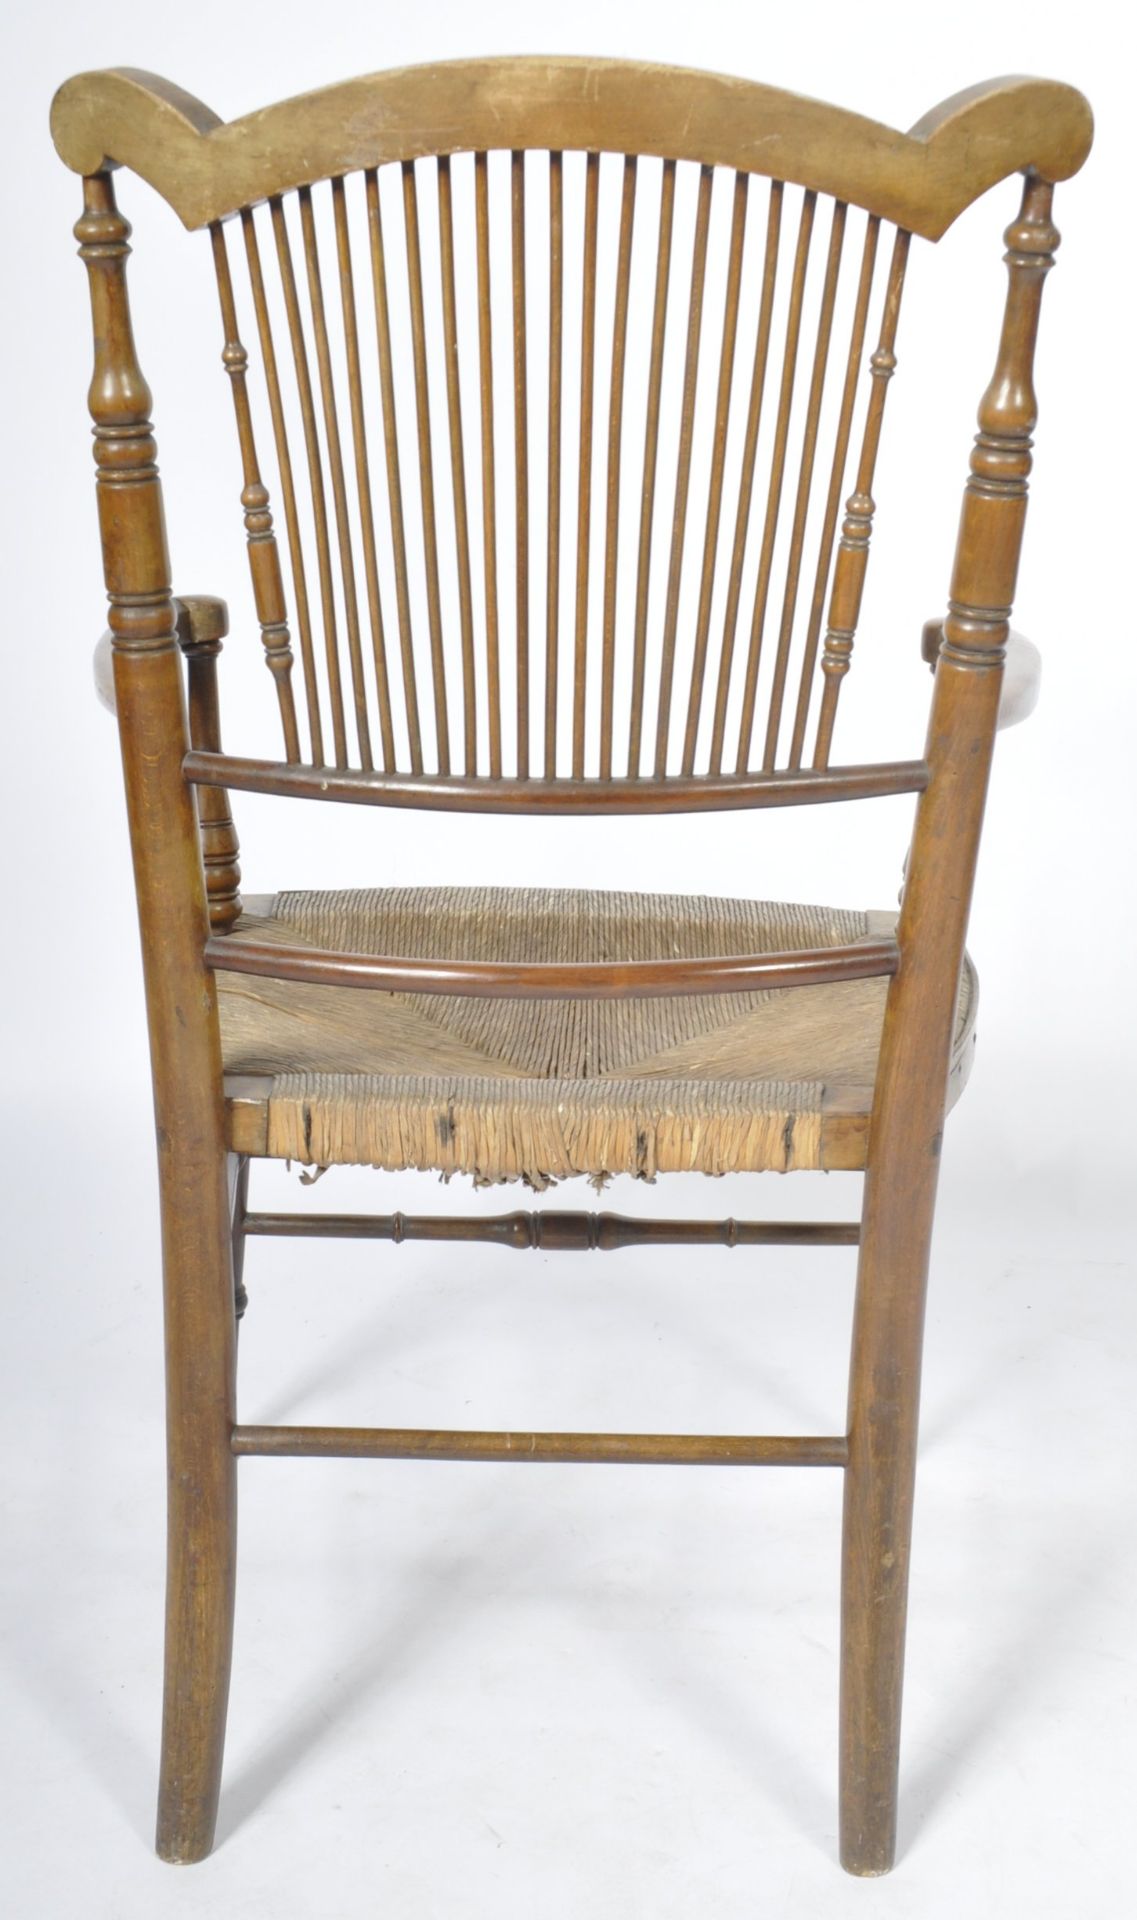 19TH CENTURY ARTS AND CRAFTS ARMCHAIR - Image 7 of 8